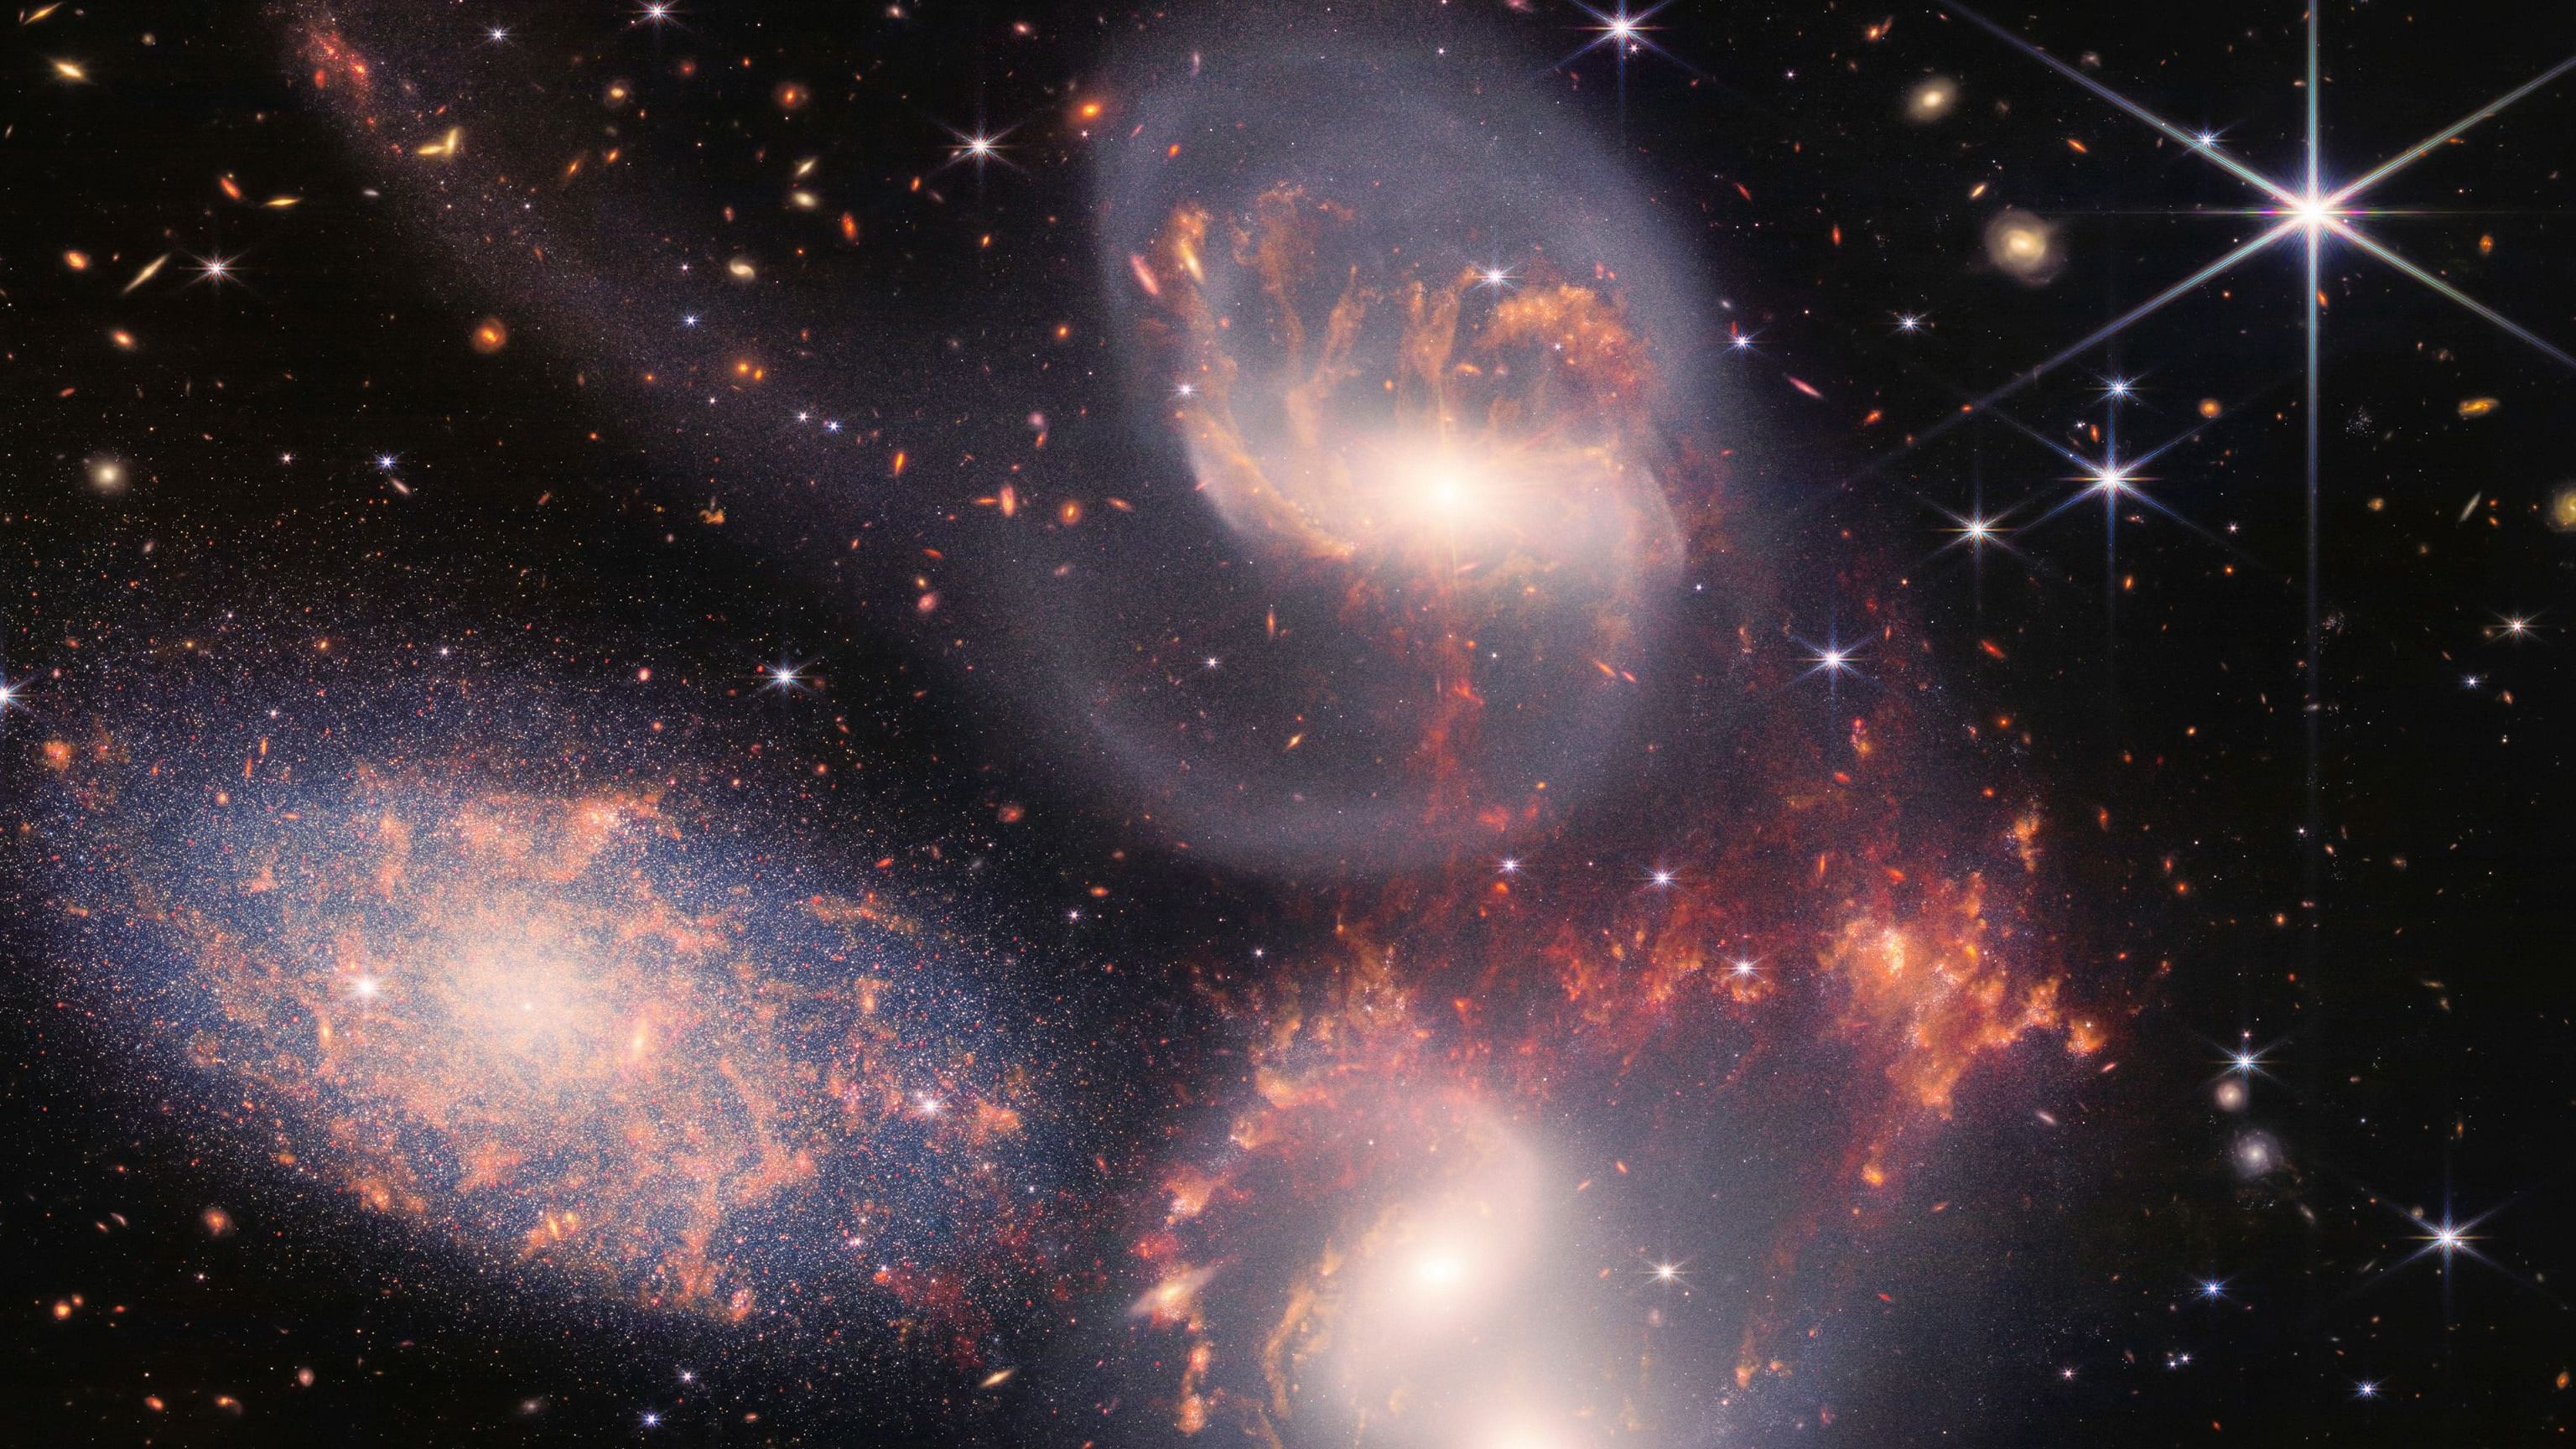 This image provided by NASA on Tuesday, July 12, 2022, shows Stephan's Quintet, a visual grouping of five galaxies captured by the Webb Telescope's Near-Infrared Camera (NIRCam) and Mid-Infrared Instrument (MIRI). This mosaic was constructed from almost 1,000 separate image files, according to NASA. Credit: AP/PTI File Photo